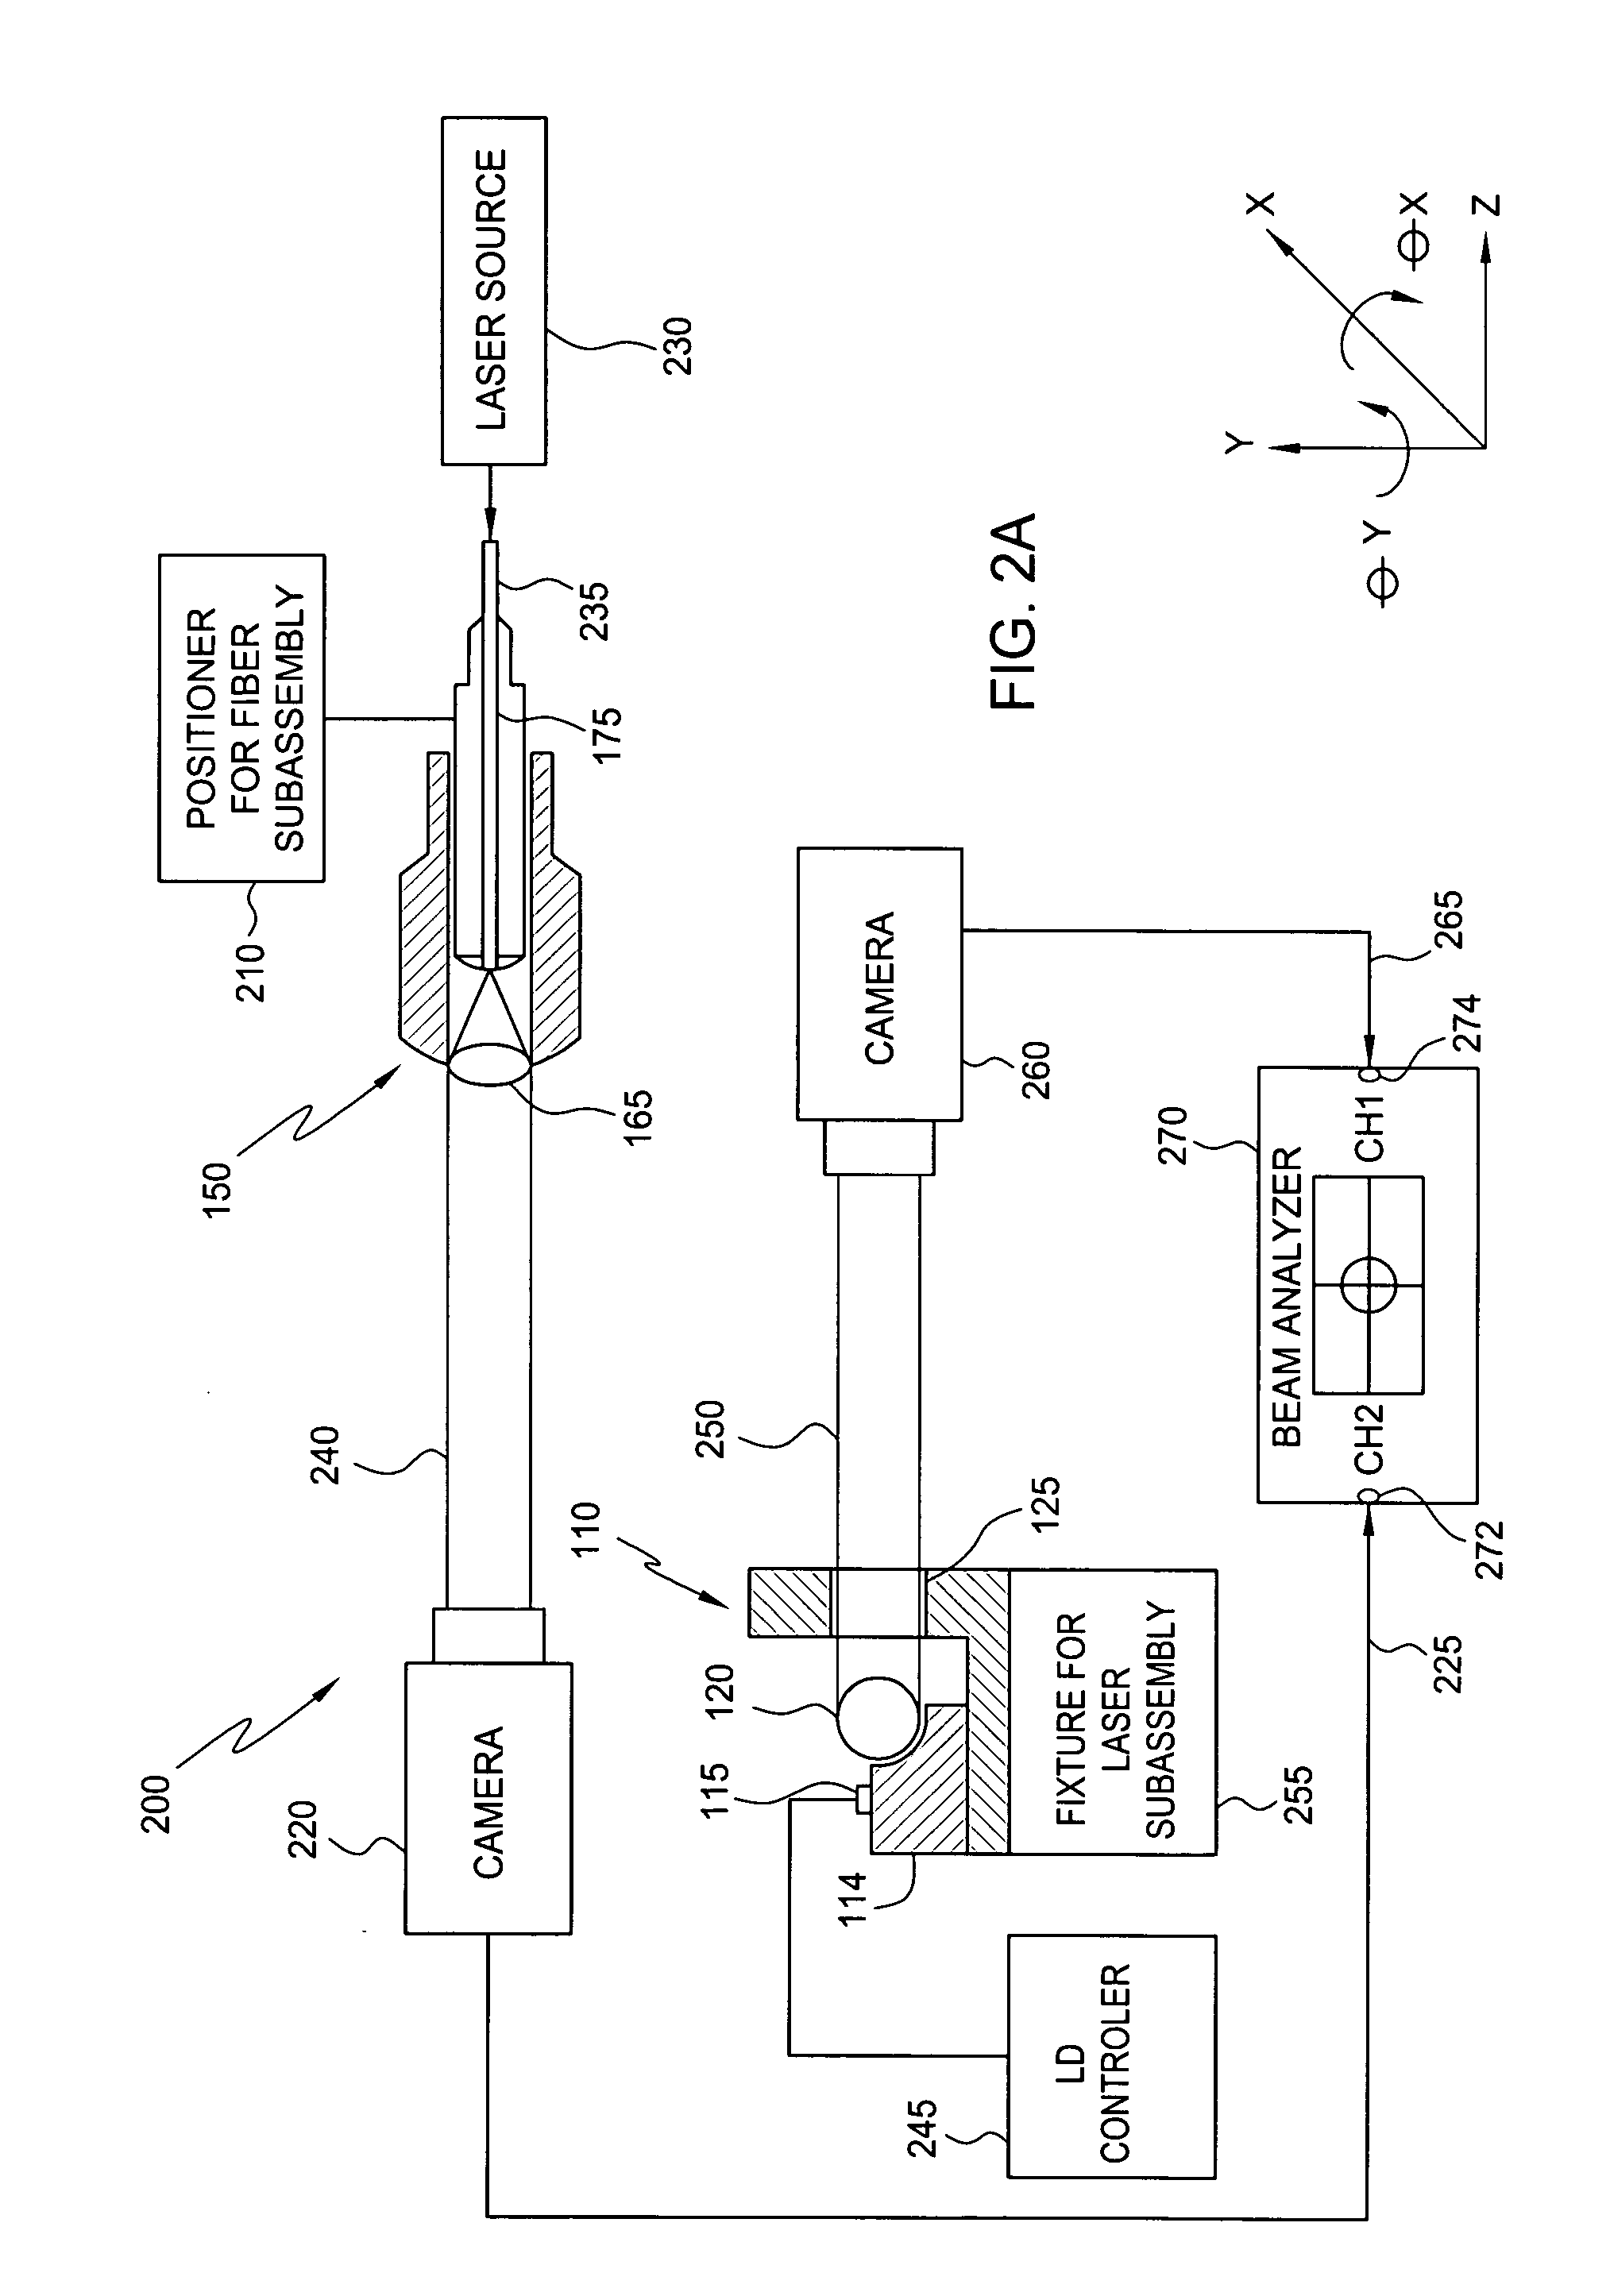 System and method for assembling optical components